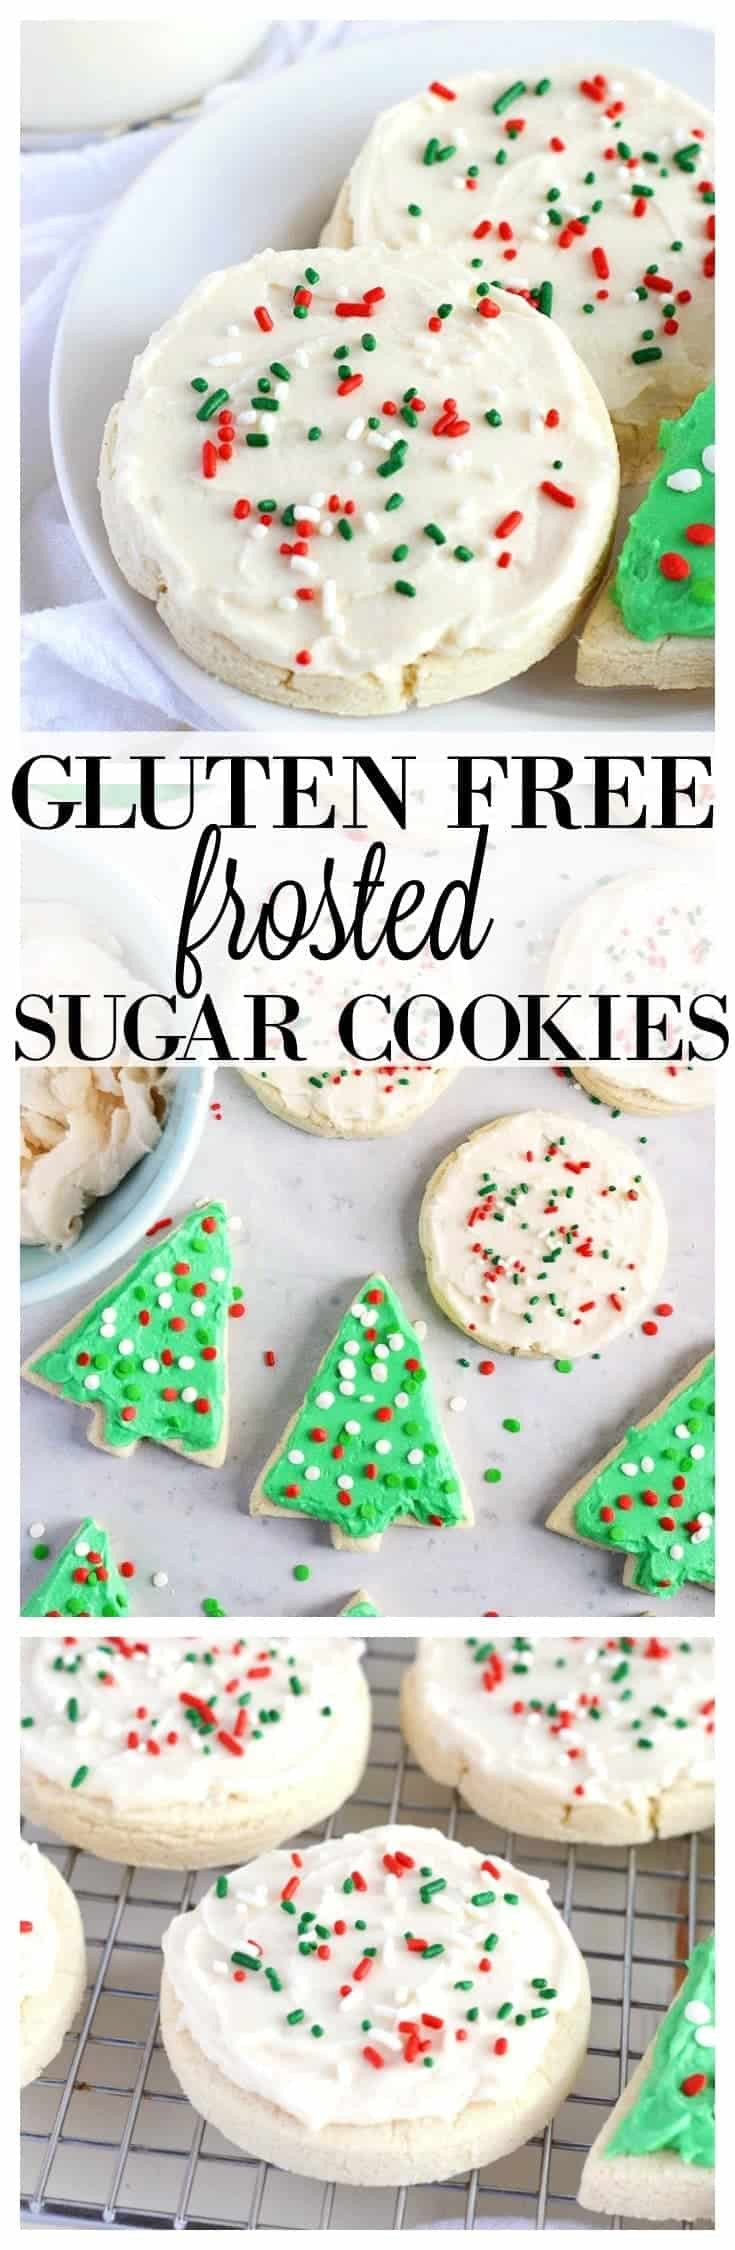 Sugar Free Sugar Cookies
 Gluten Free Soft Frosted Sugar Cookies What the Fork